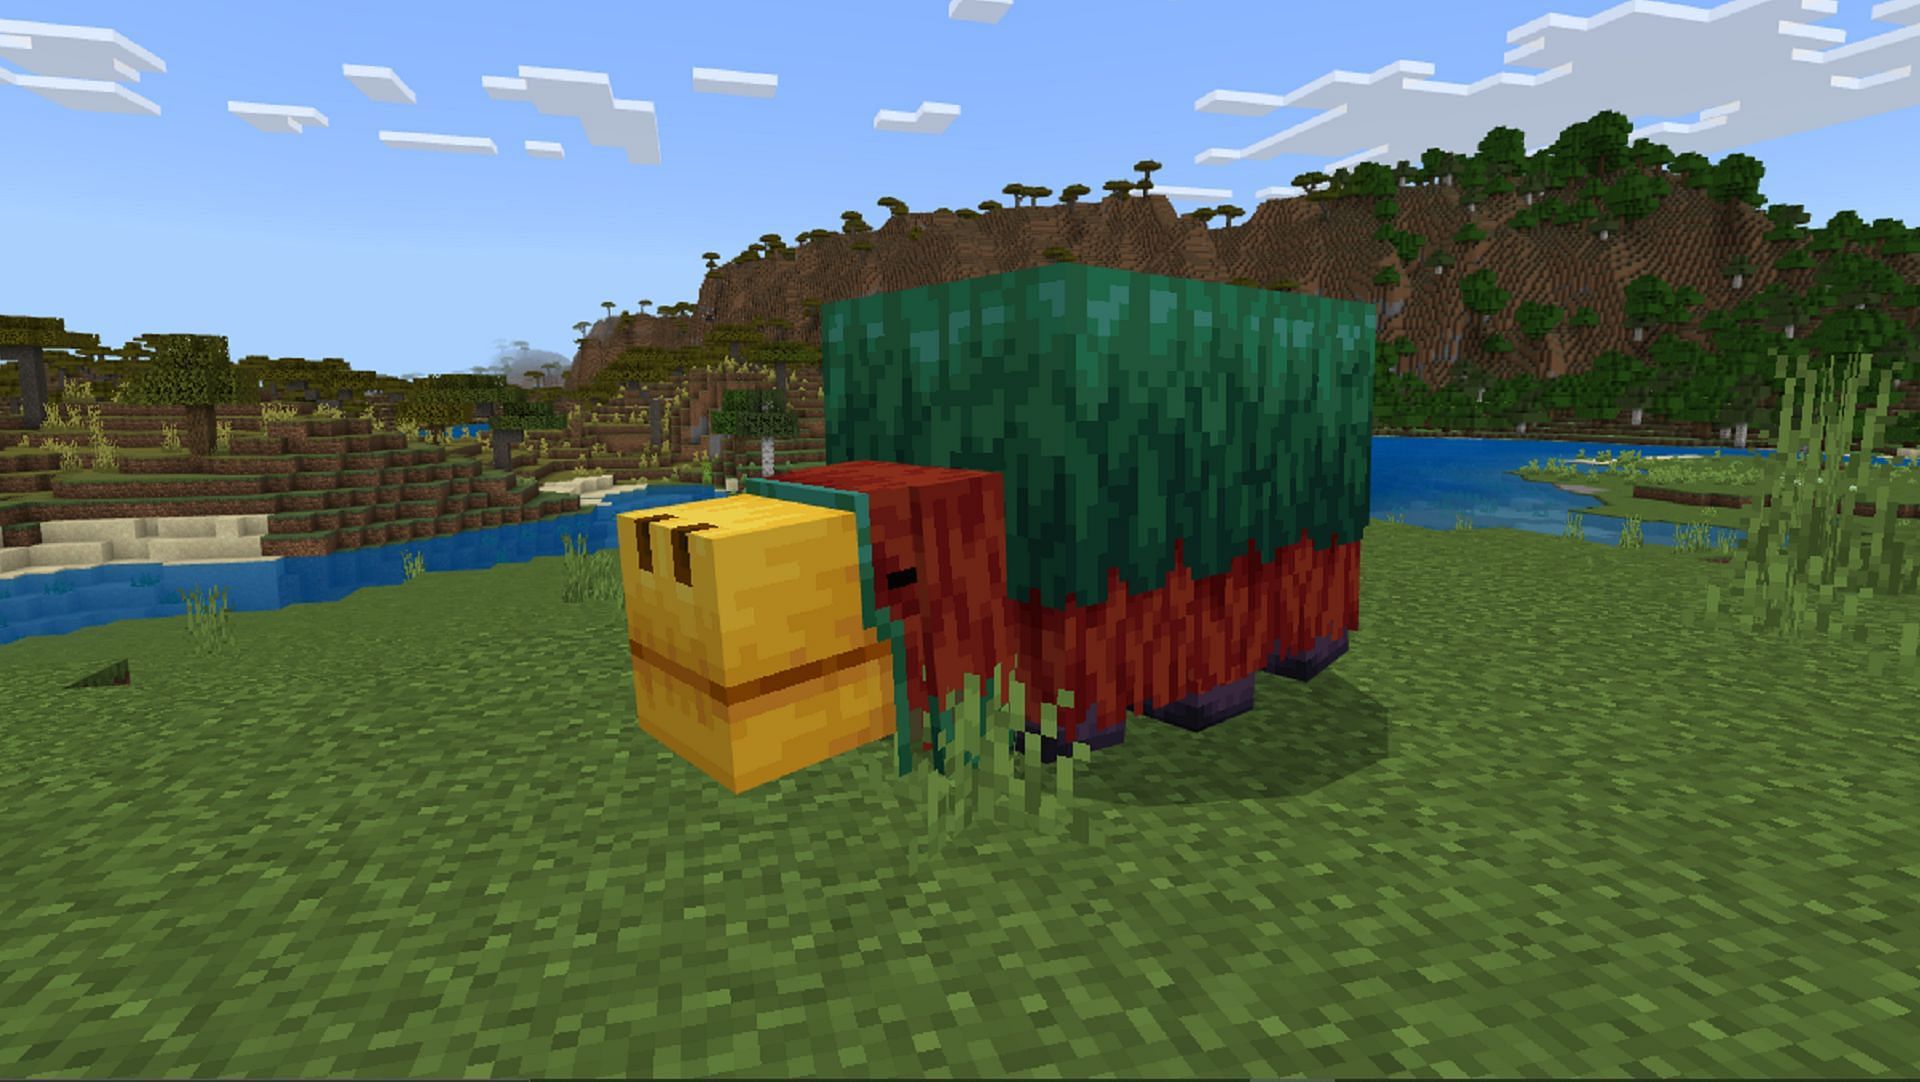 The friendly sniffer mob can help players find and grow Torchflowers in the wild (Image via Mojang)